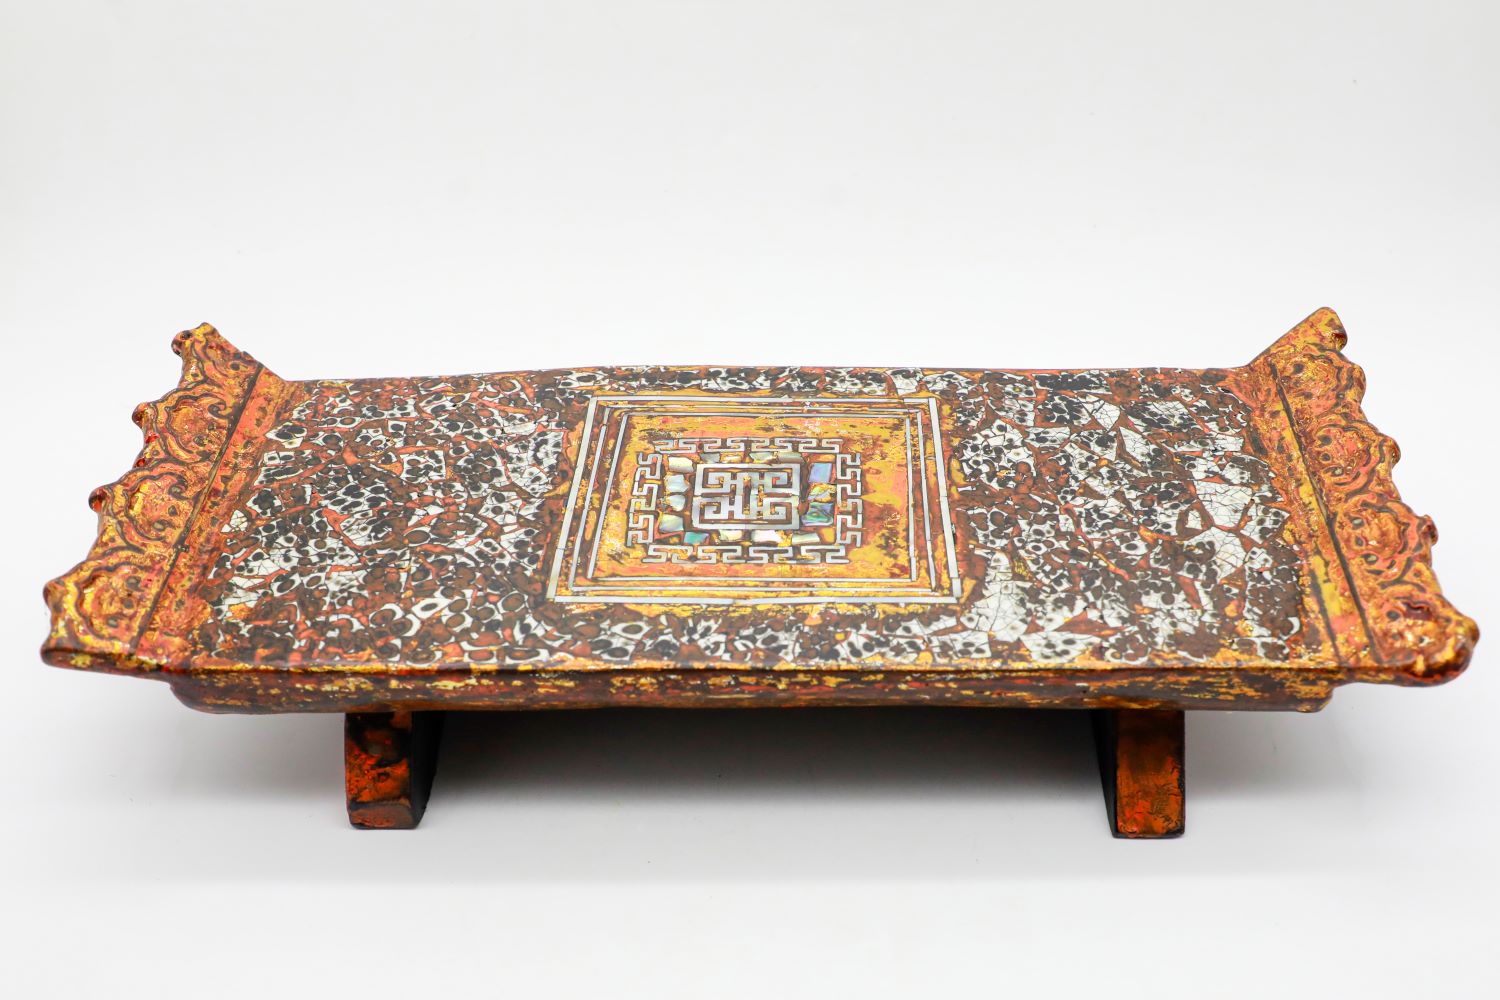 Dragon Small Table VII - Vietnamese Lacquer Artwork by Artist Nguyen Tan Phat